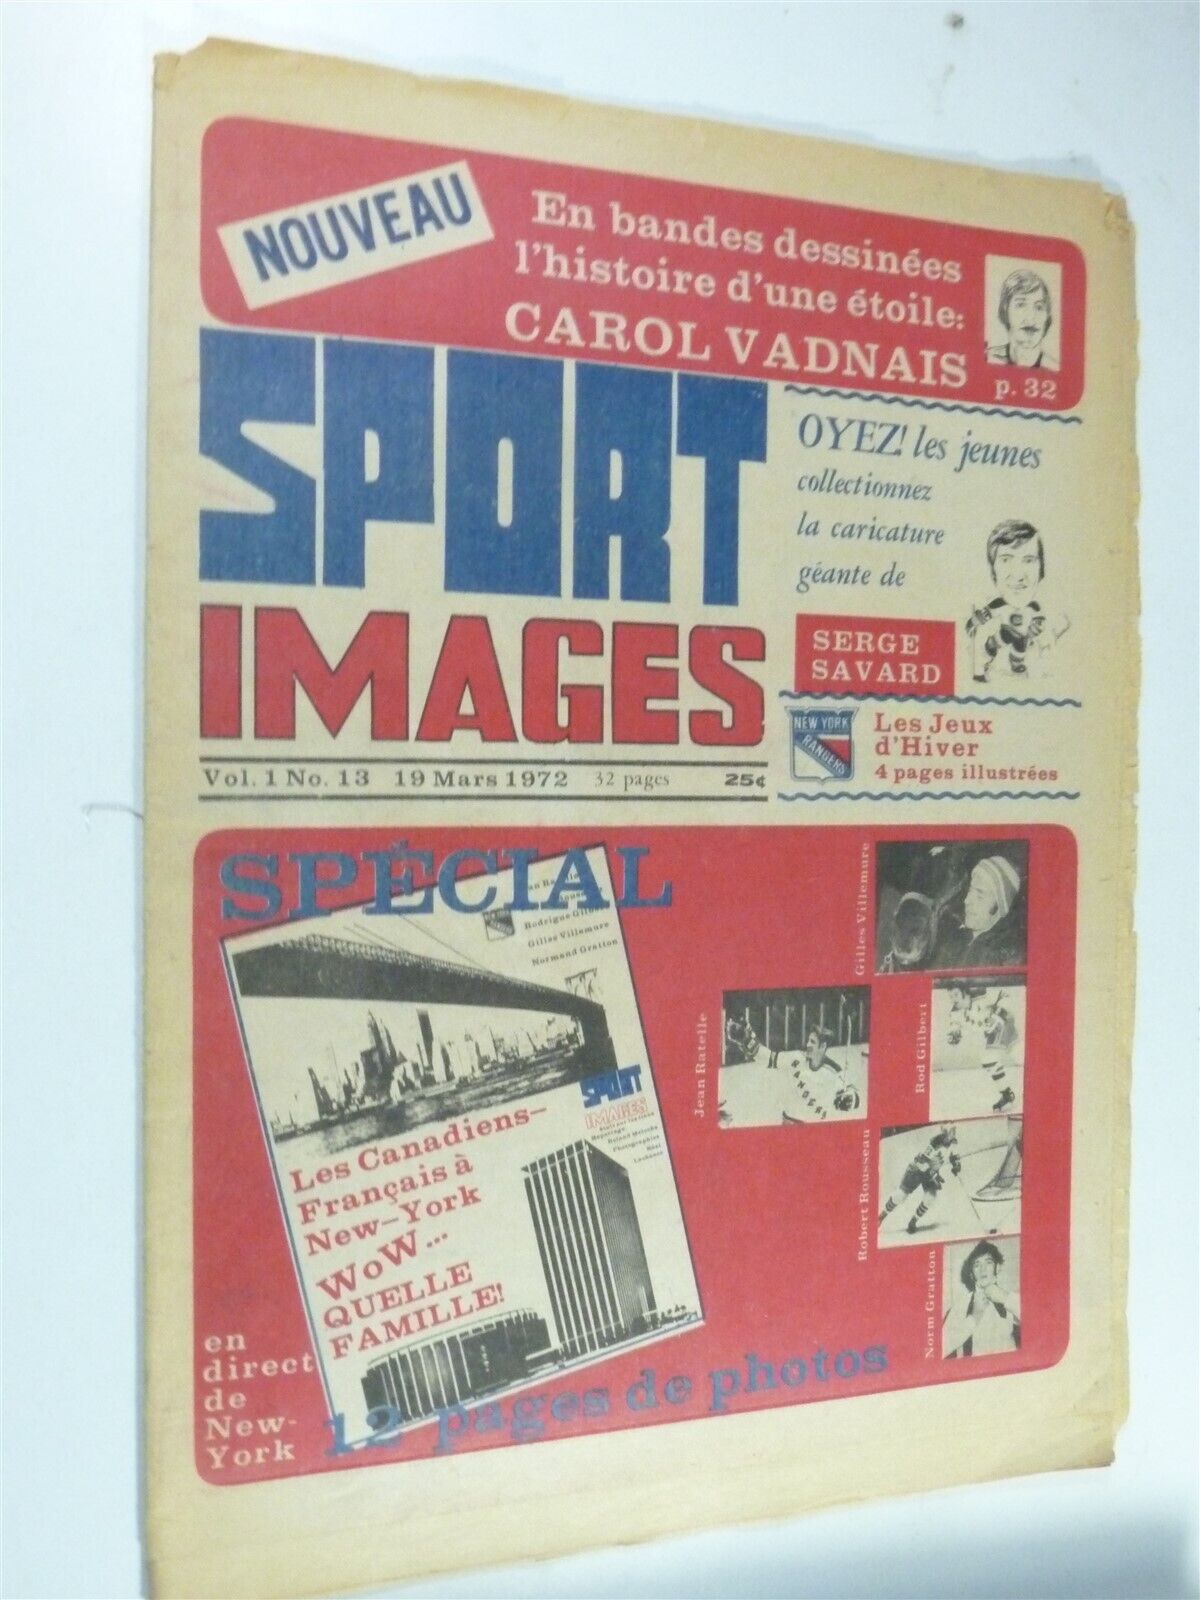 VINTAGE SPORTS NEWSPAPER MARCH 1972 SPORT IMAGES NEW YORK RANGERS (with tears)